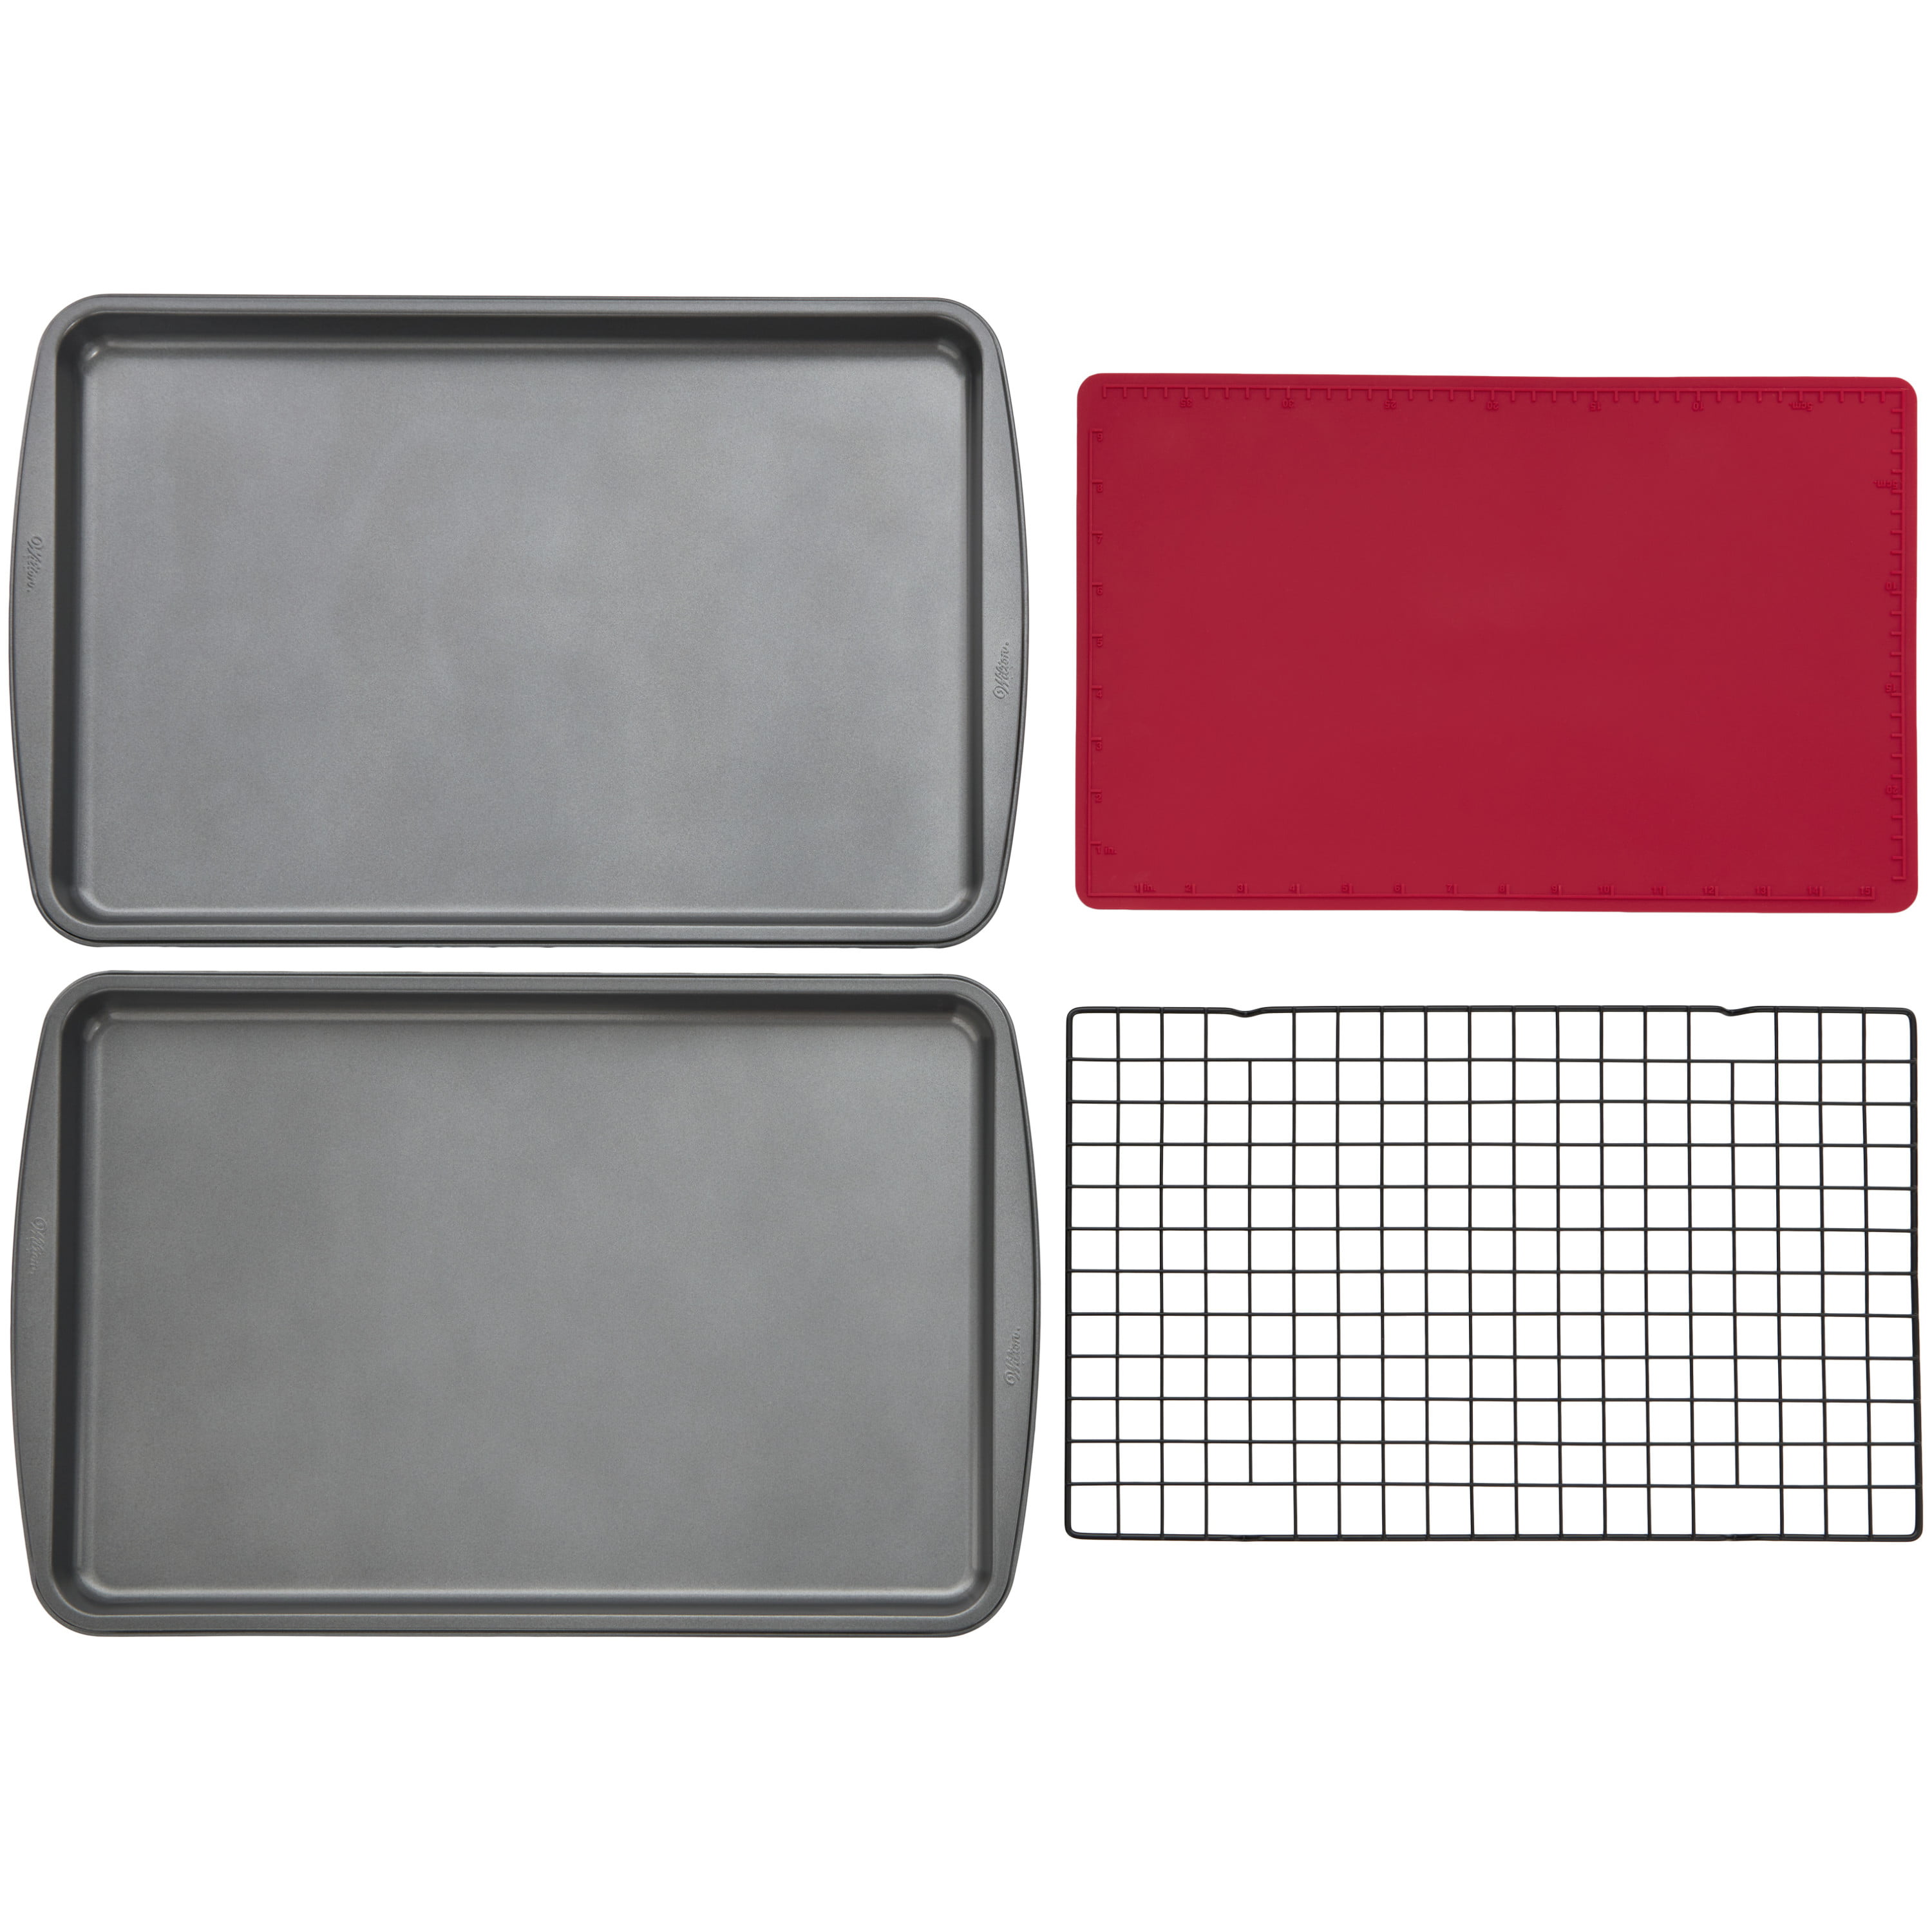 Silicone Baking Sheet Pan Set, 4PCS Nonstick Silicone Dividers for Baking  Trays, Cooking Baking Pan Dividers with Handle, Reusable Bakeware for Meal